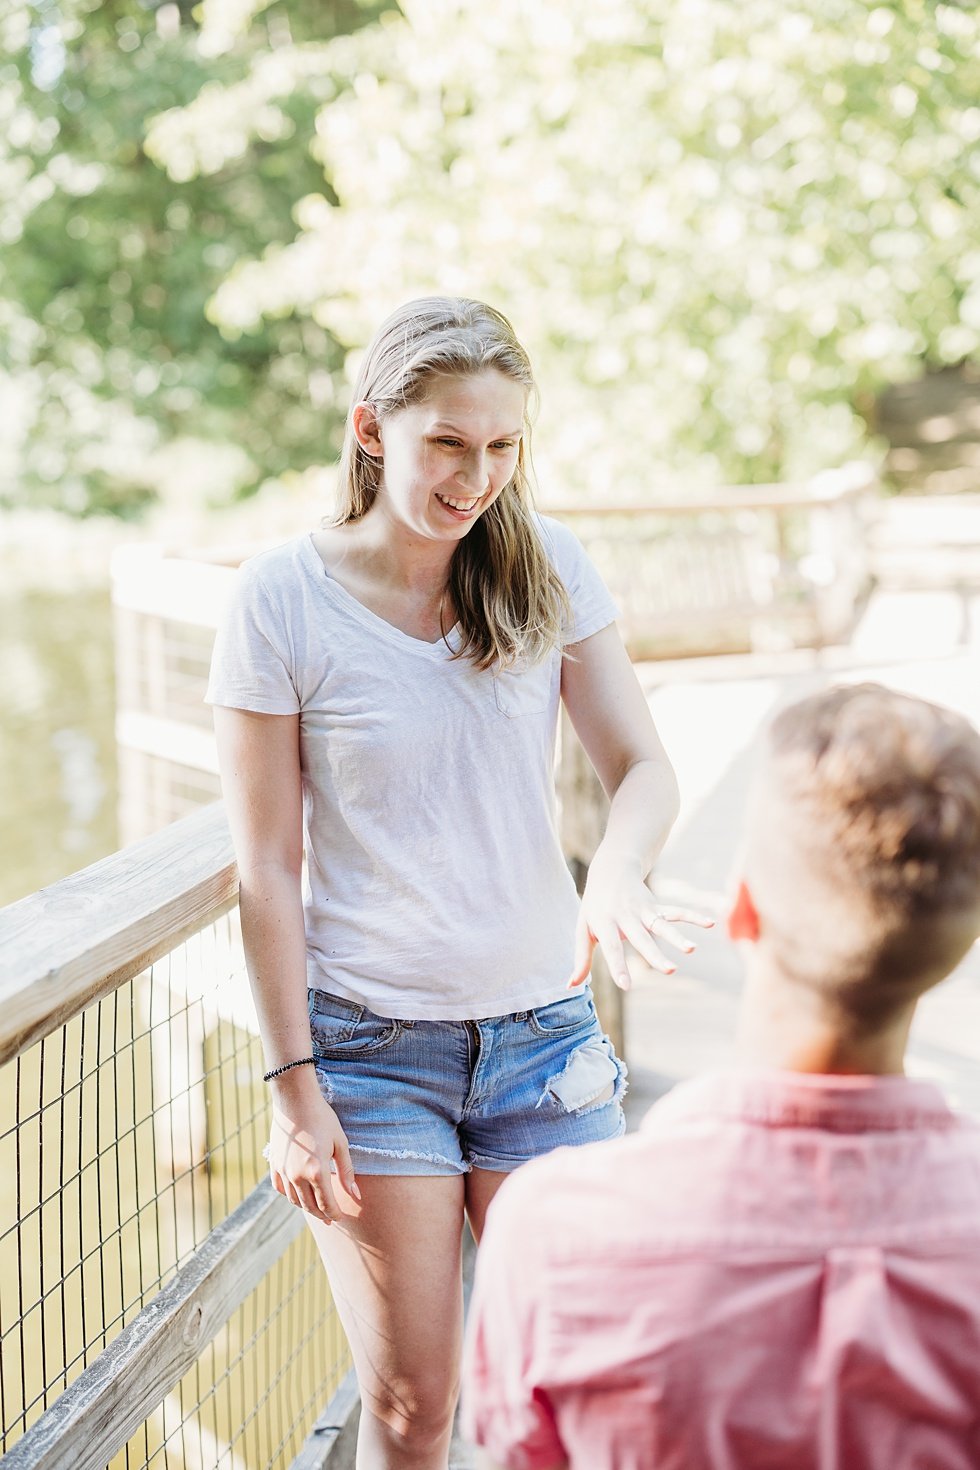  A surprise proposal and engagement session at Bernheim forest. 